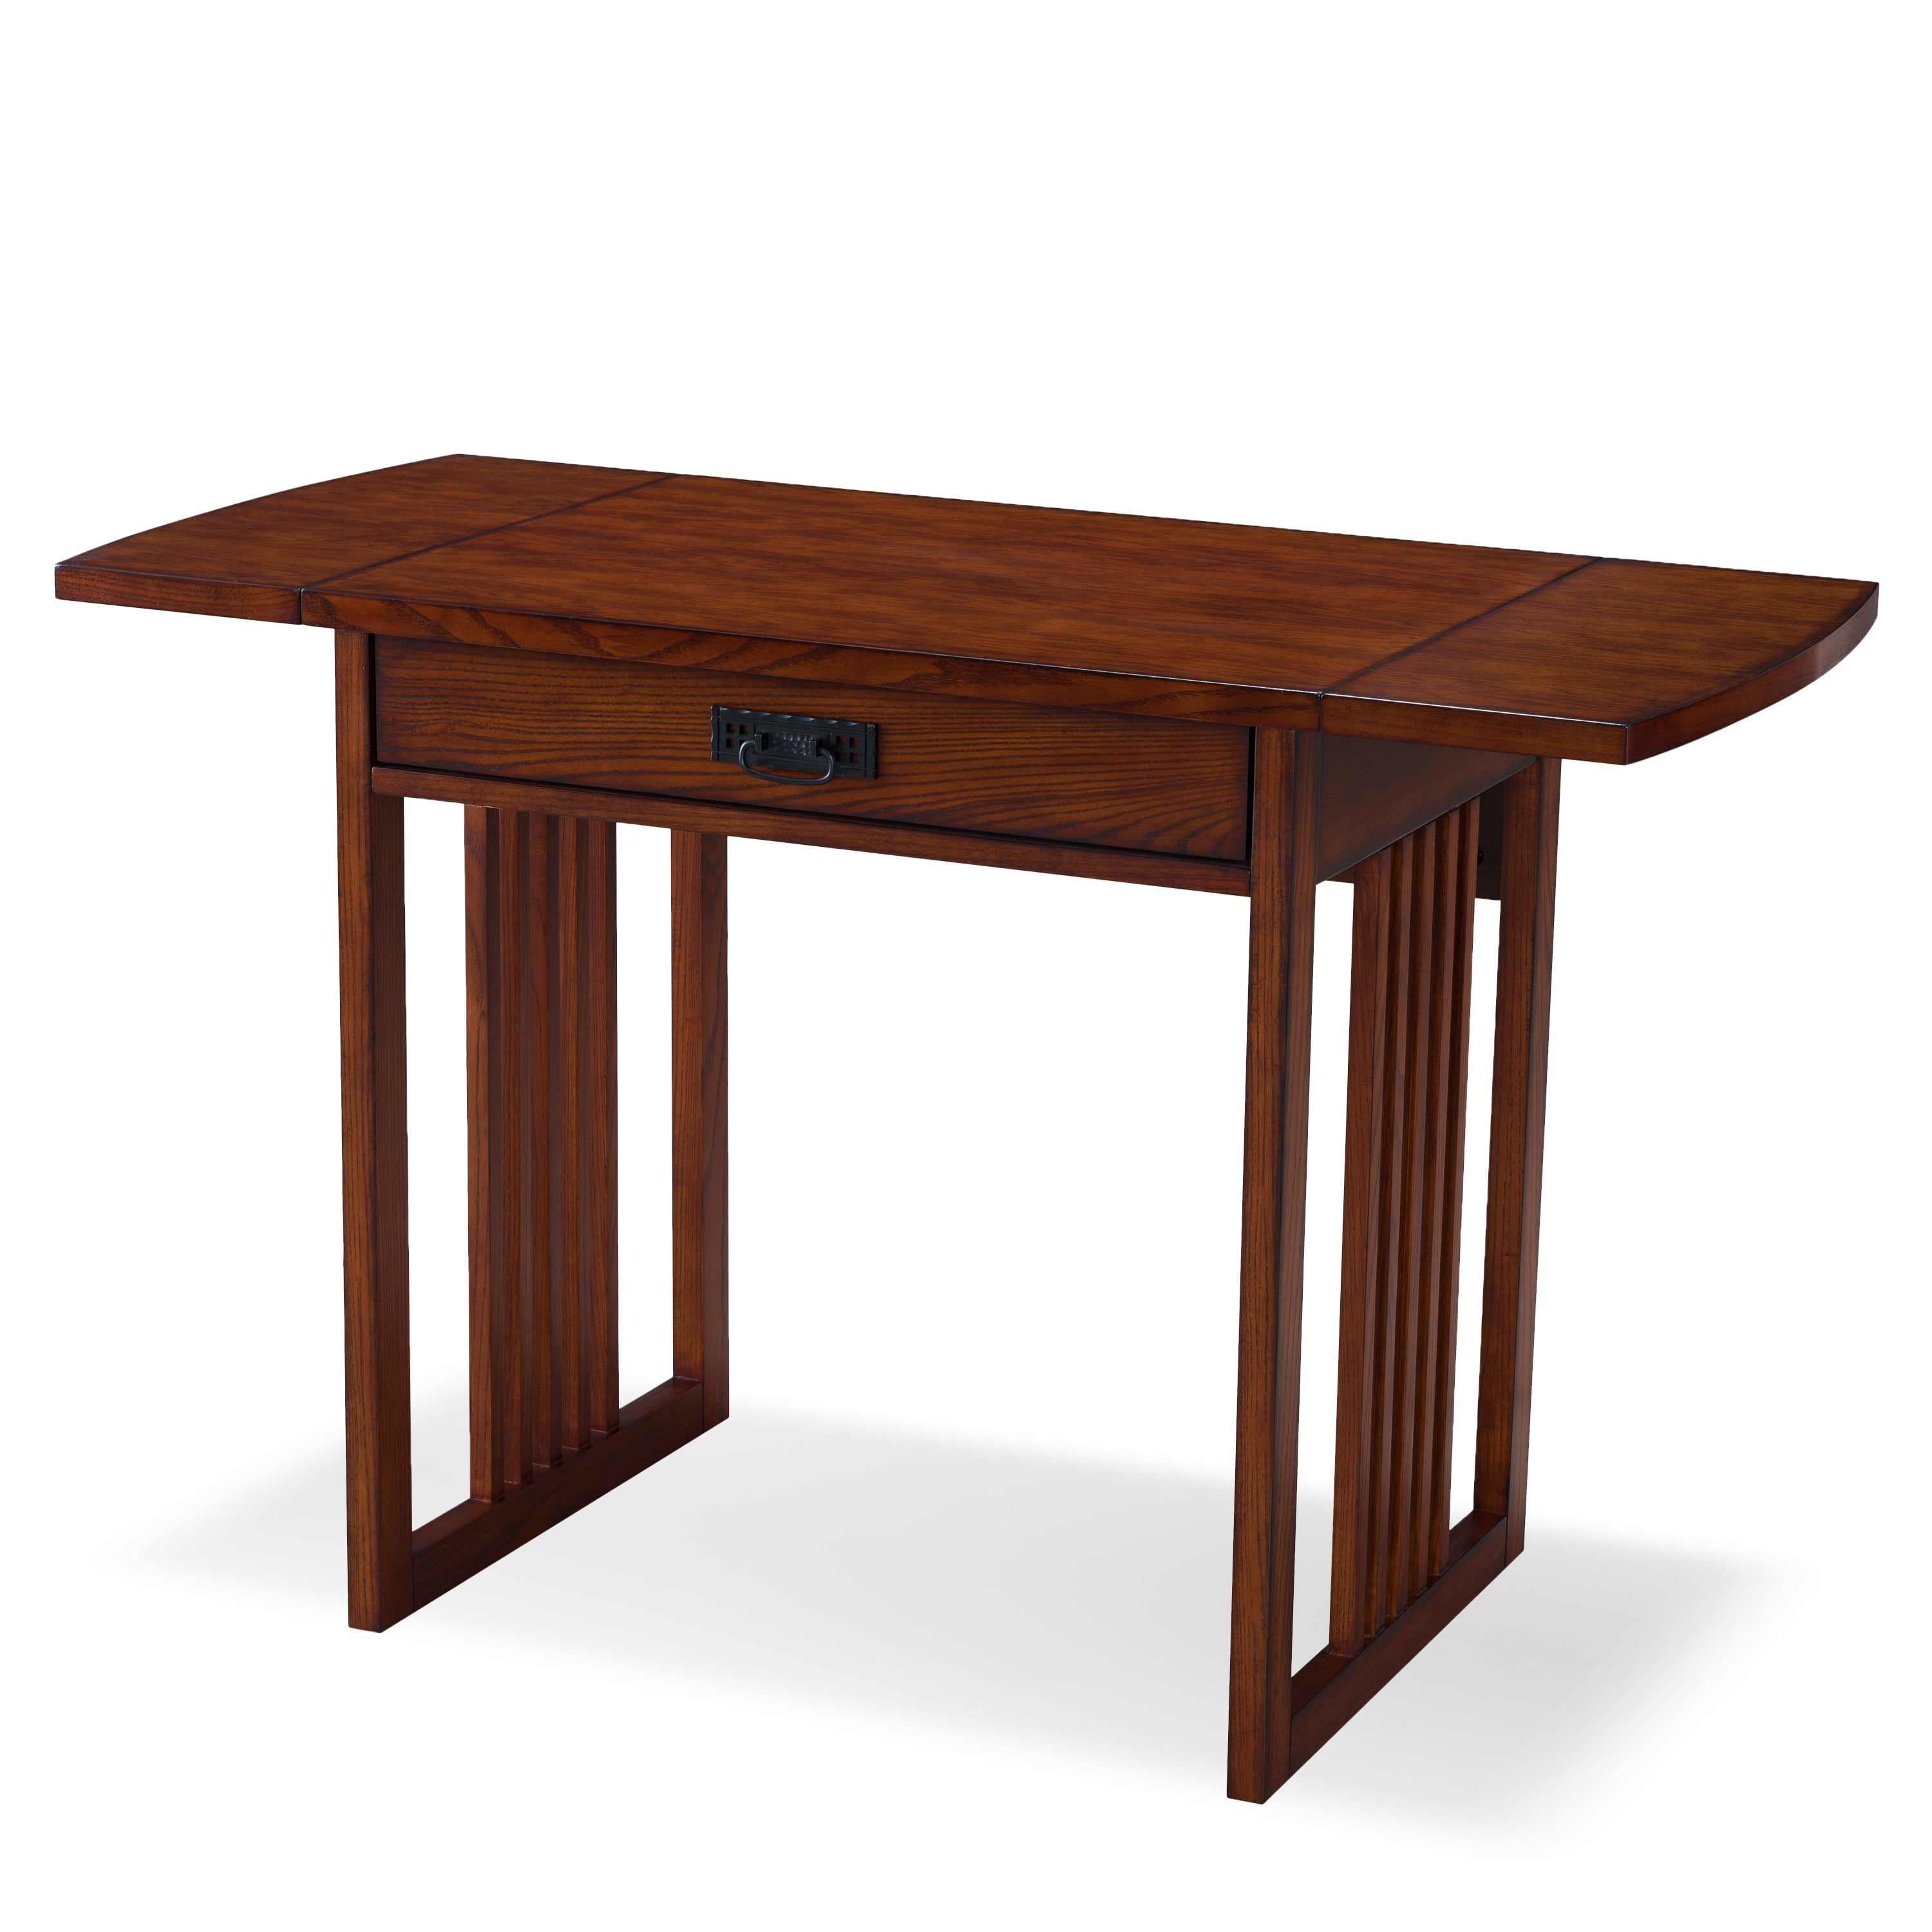 OSP Home Furnishings Sierra Writing Desk in Ash Finish with Pull Out Drawer  and Solid Wood Legs - Walmart.com